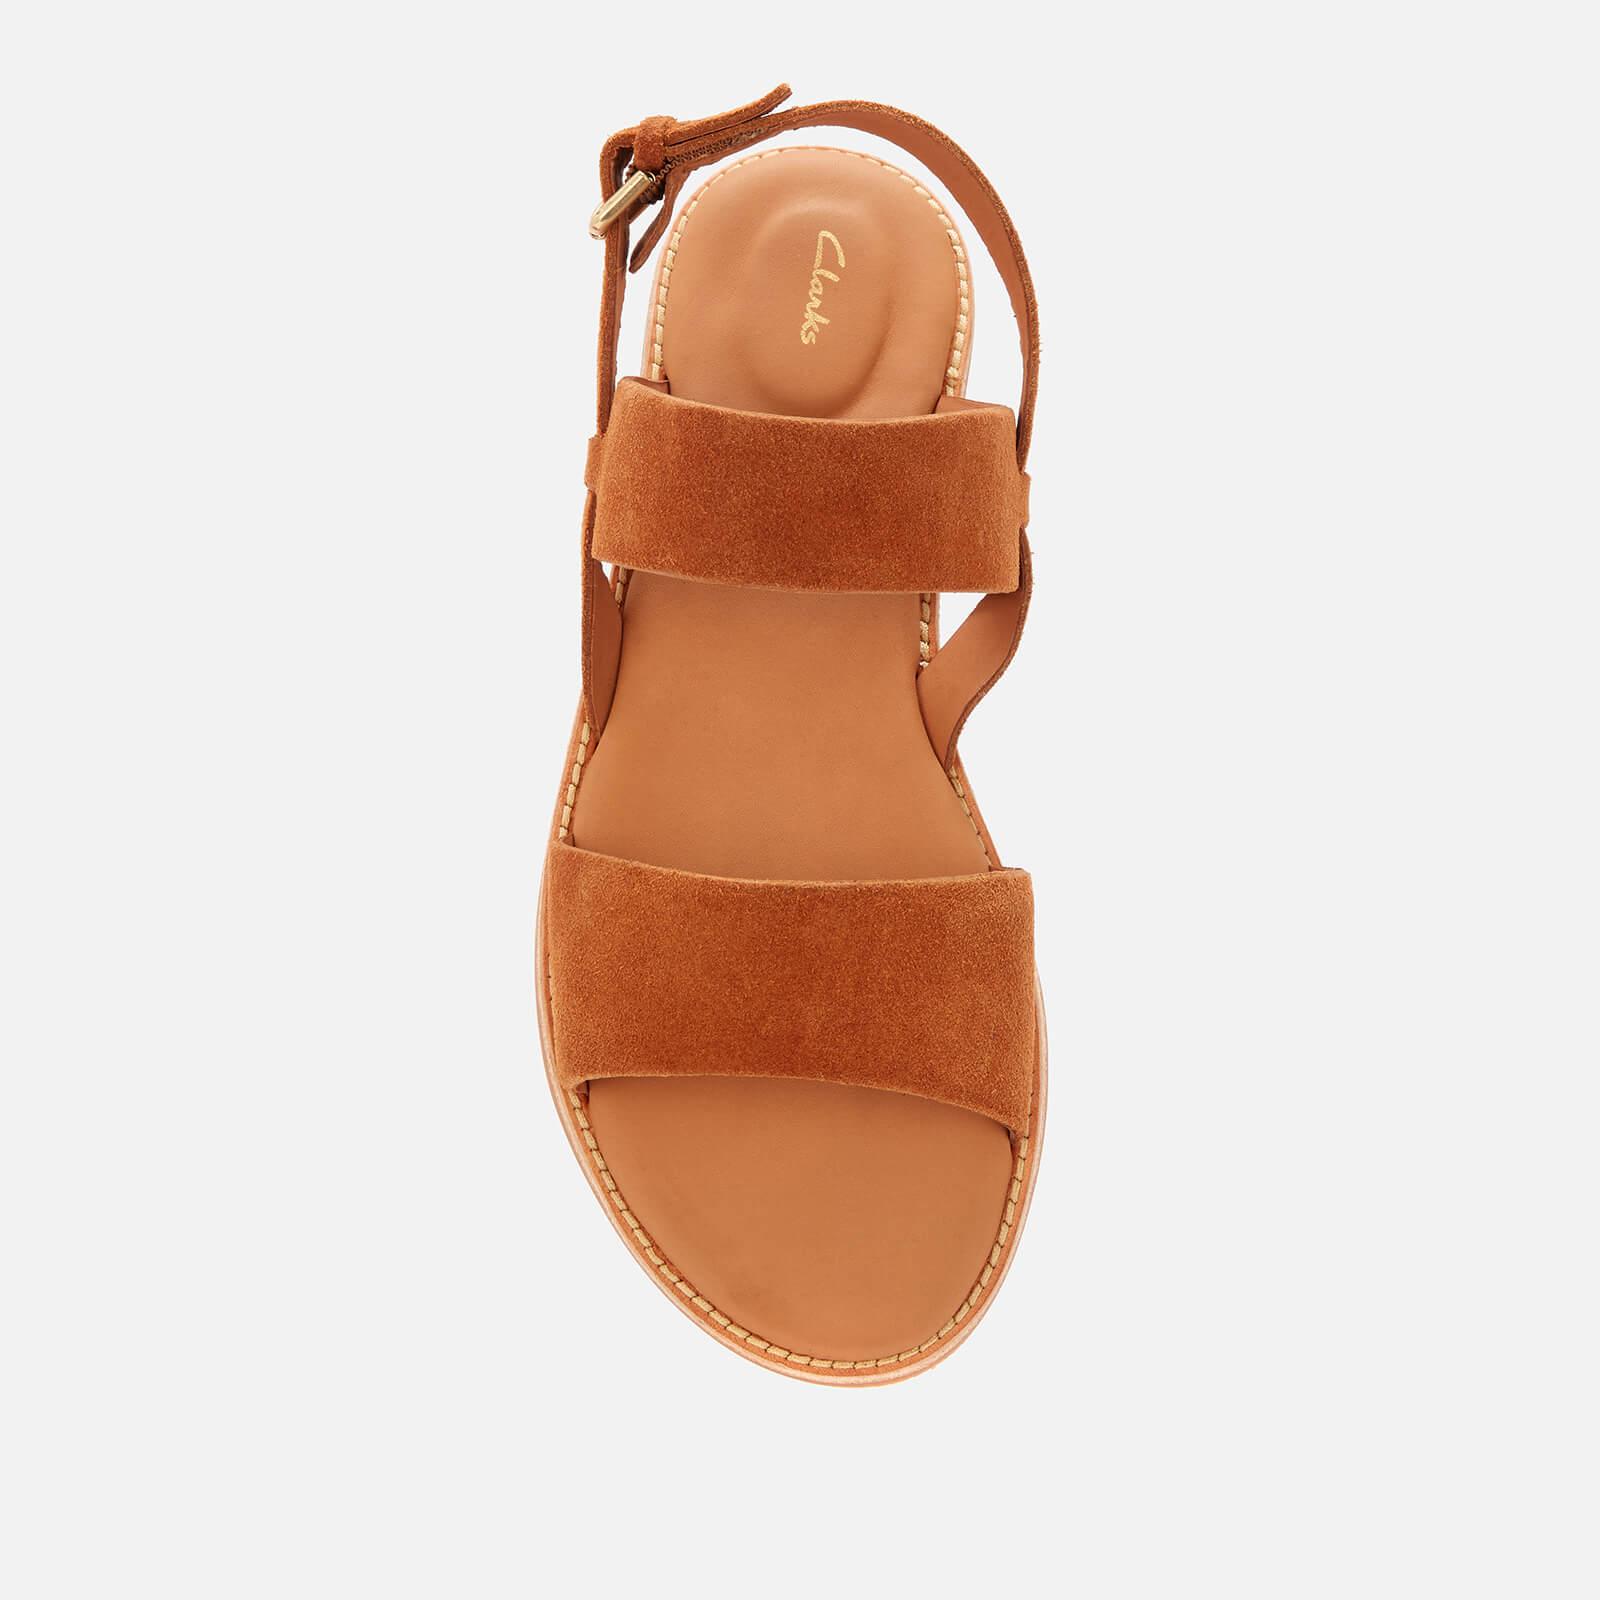 Clarks Karsea Strap Leather Flat Sandals in Brown | Lyst